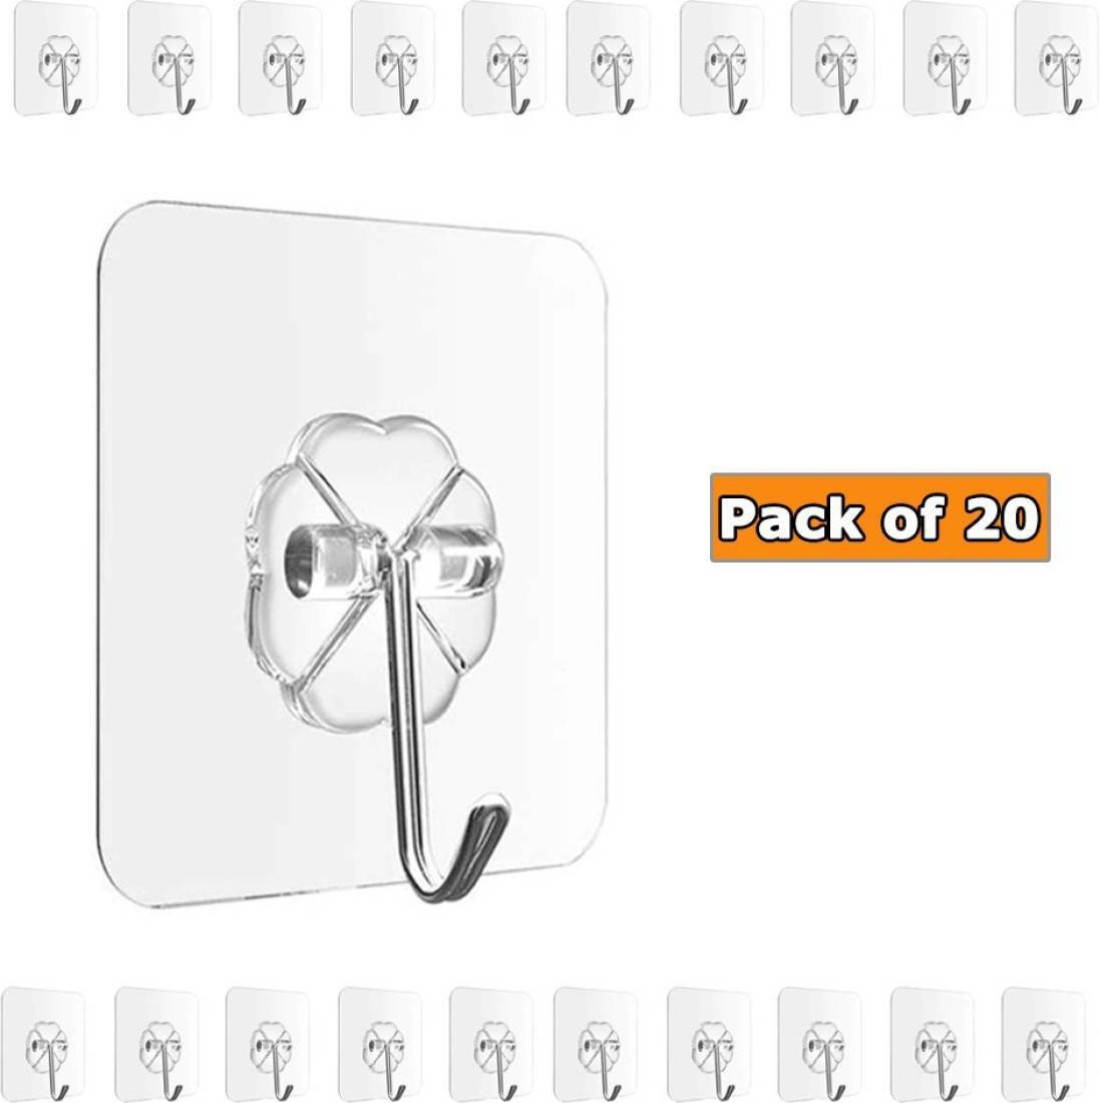 Self Adhesive Wall Hooks, Heavy Duty Sticky Hooks for Hanging 10KG